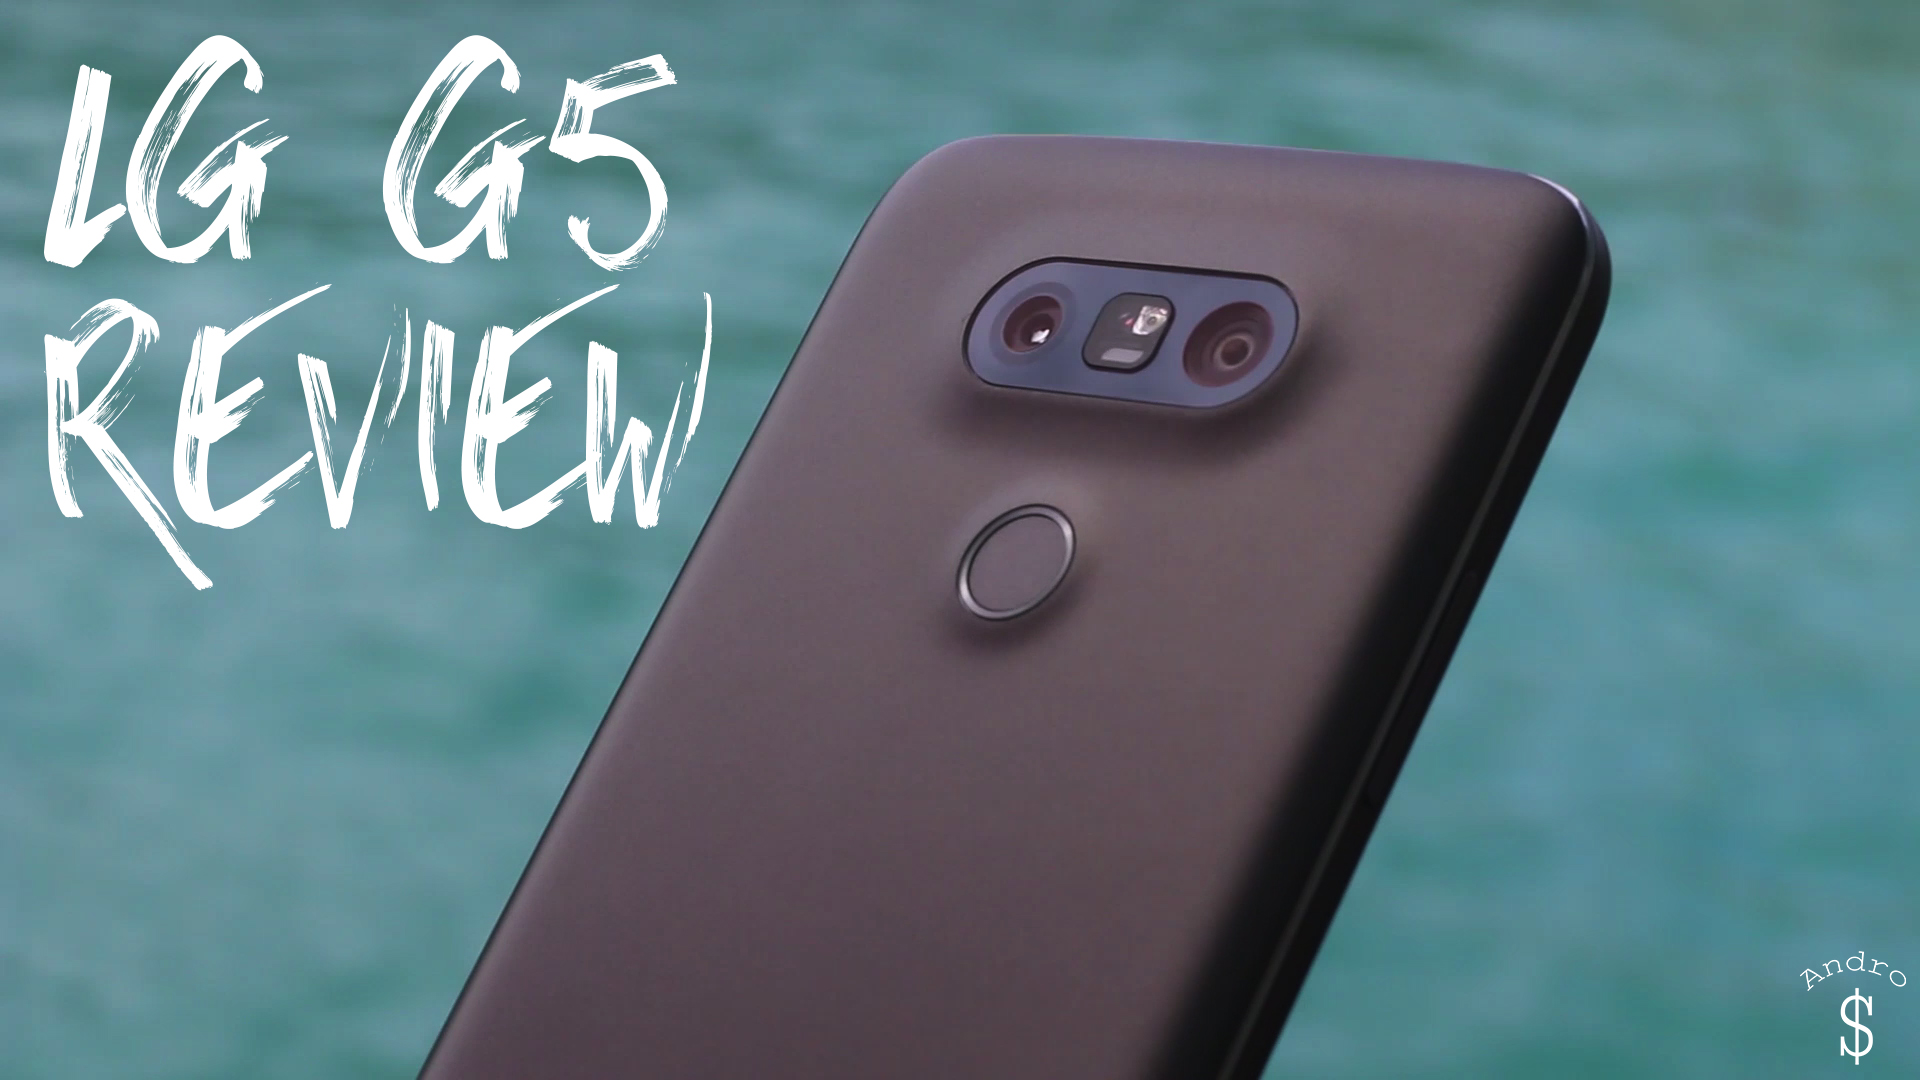 LG G5 Review Water